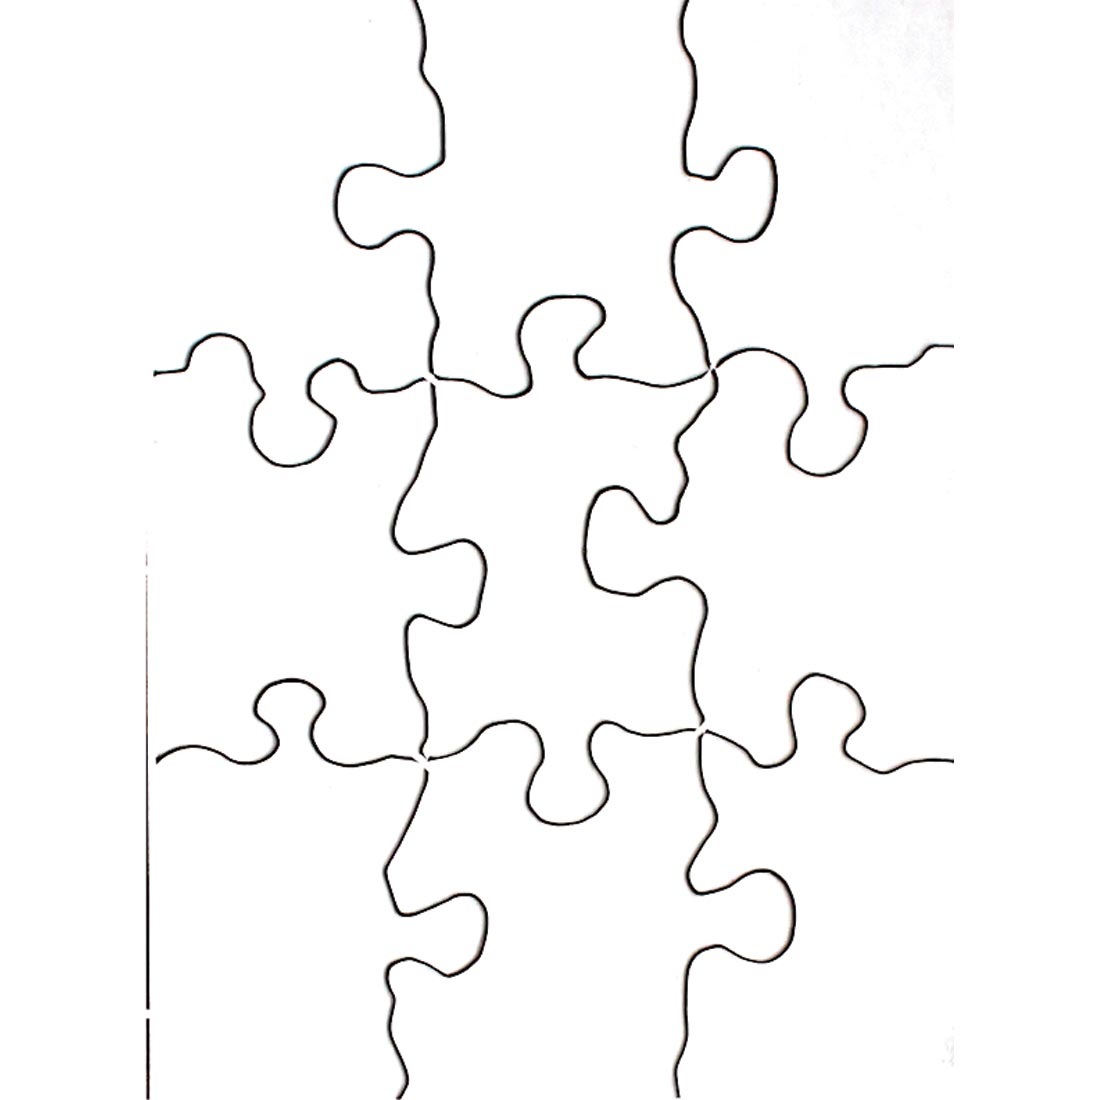 Blank Compoz-A-Puzzle 9-Piece Small Rectangle